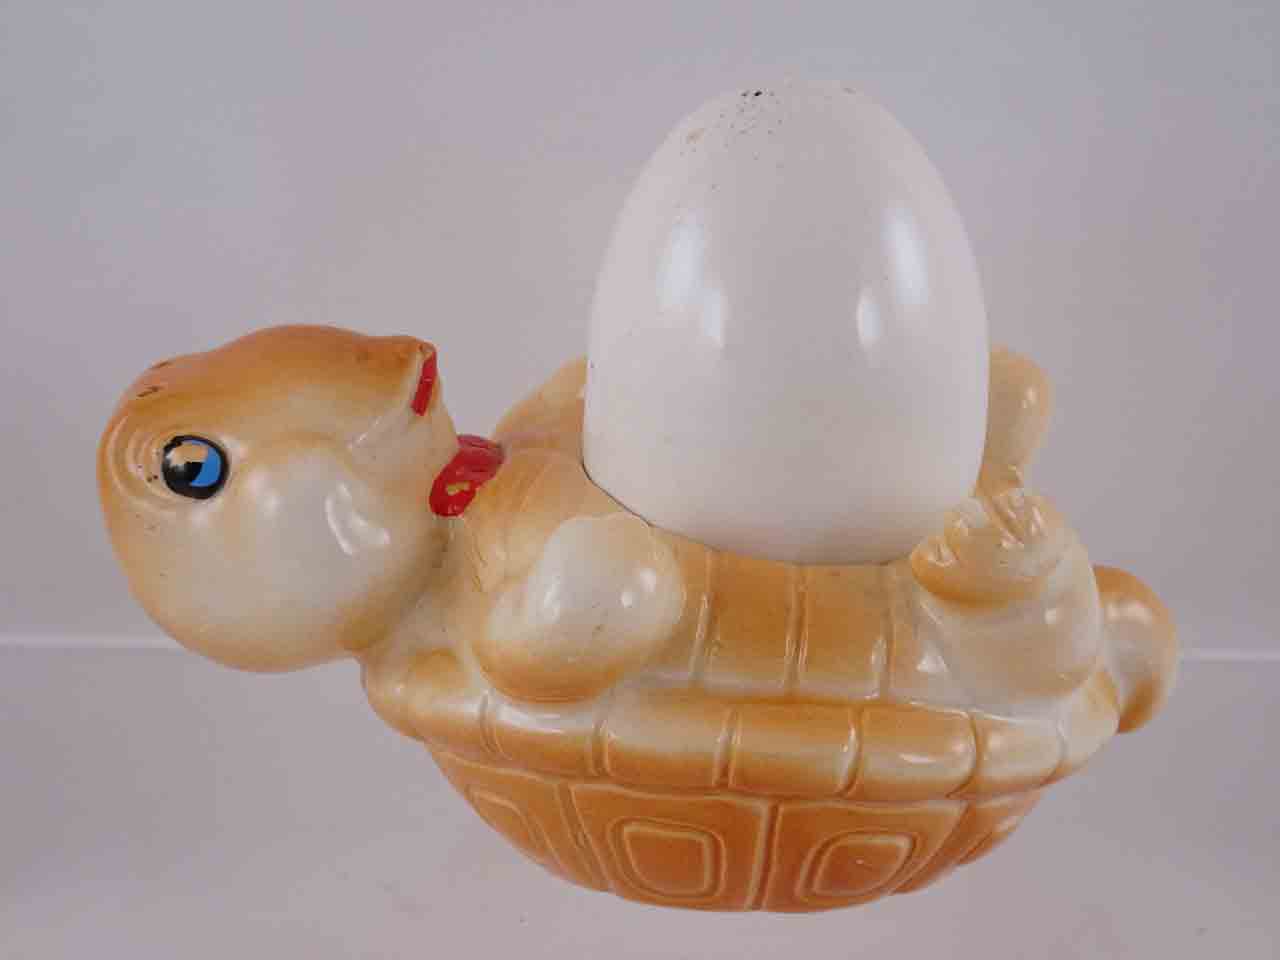 Animals with eggs on backs / stomachs stacking salt and pepper shakers - turtle